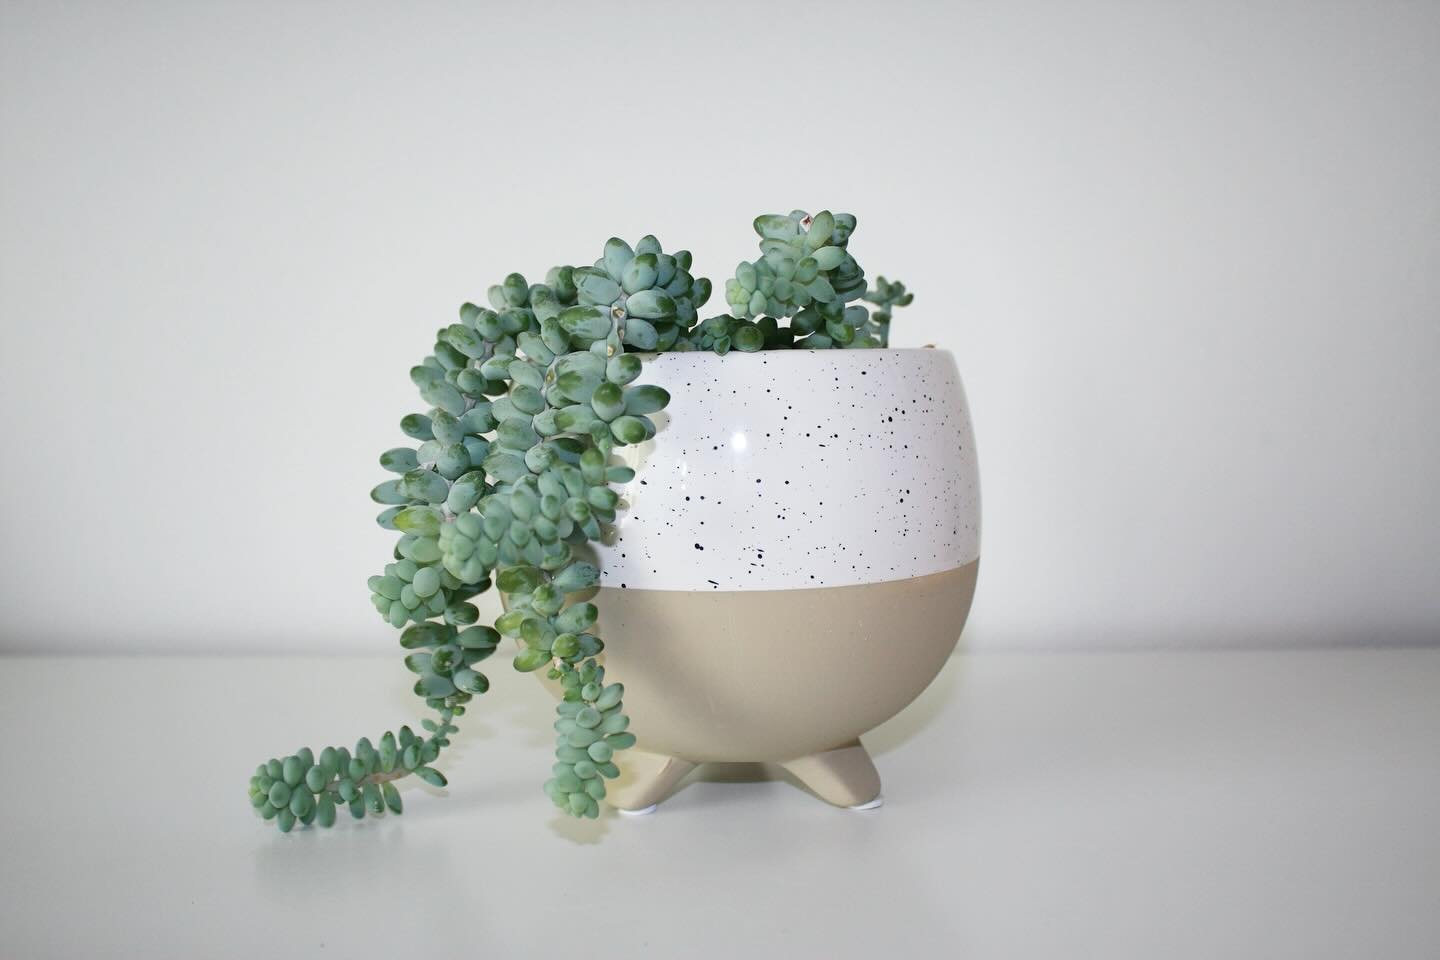 Just two more days of the Mother&rsquo;s Day sale! Grab one of these gorgeous plant pots, fill it with a pretty plant, stick in a cute Mother&rsquo;s Day plant marker, and you have the perfect gift for mom 💛
Everything is 25% off with code MAMA25 un